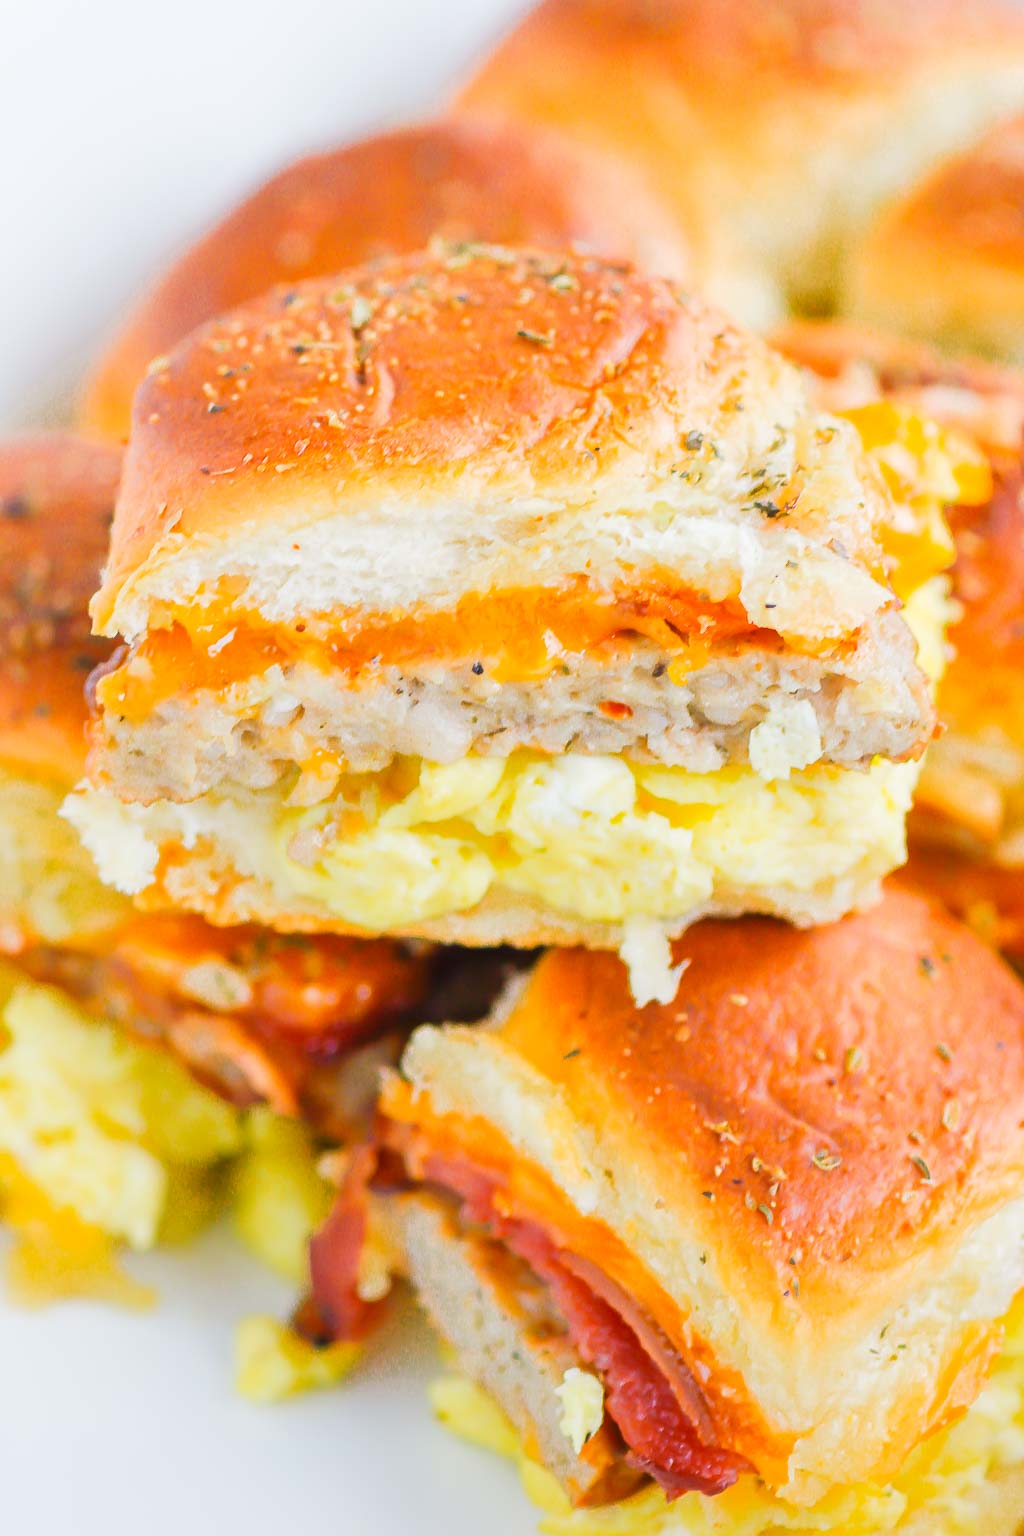 Breakfast Sliders are an easy, make-ahead dish that's filled with your favorite ingredients. Perfect to serve for a crowd or for when you need breakfast on-the-go! #sliders #breakfastsliders #breakfastsandwich #easybreakfast #makeaheadbreakfast #mealprep #breakfast